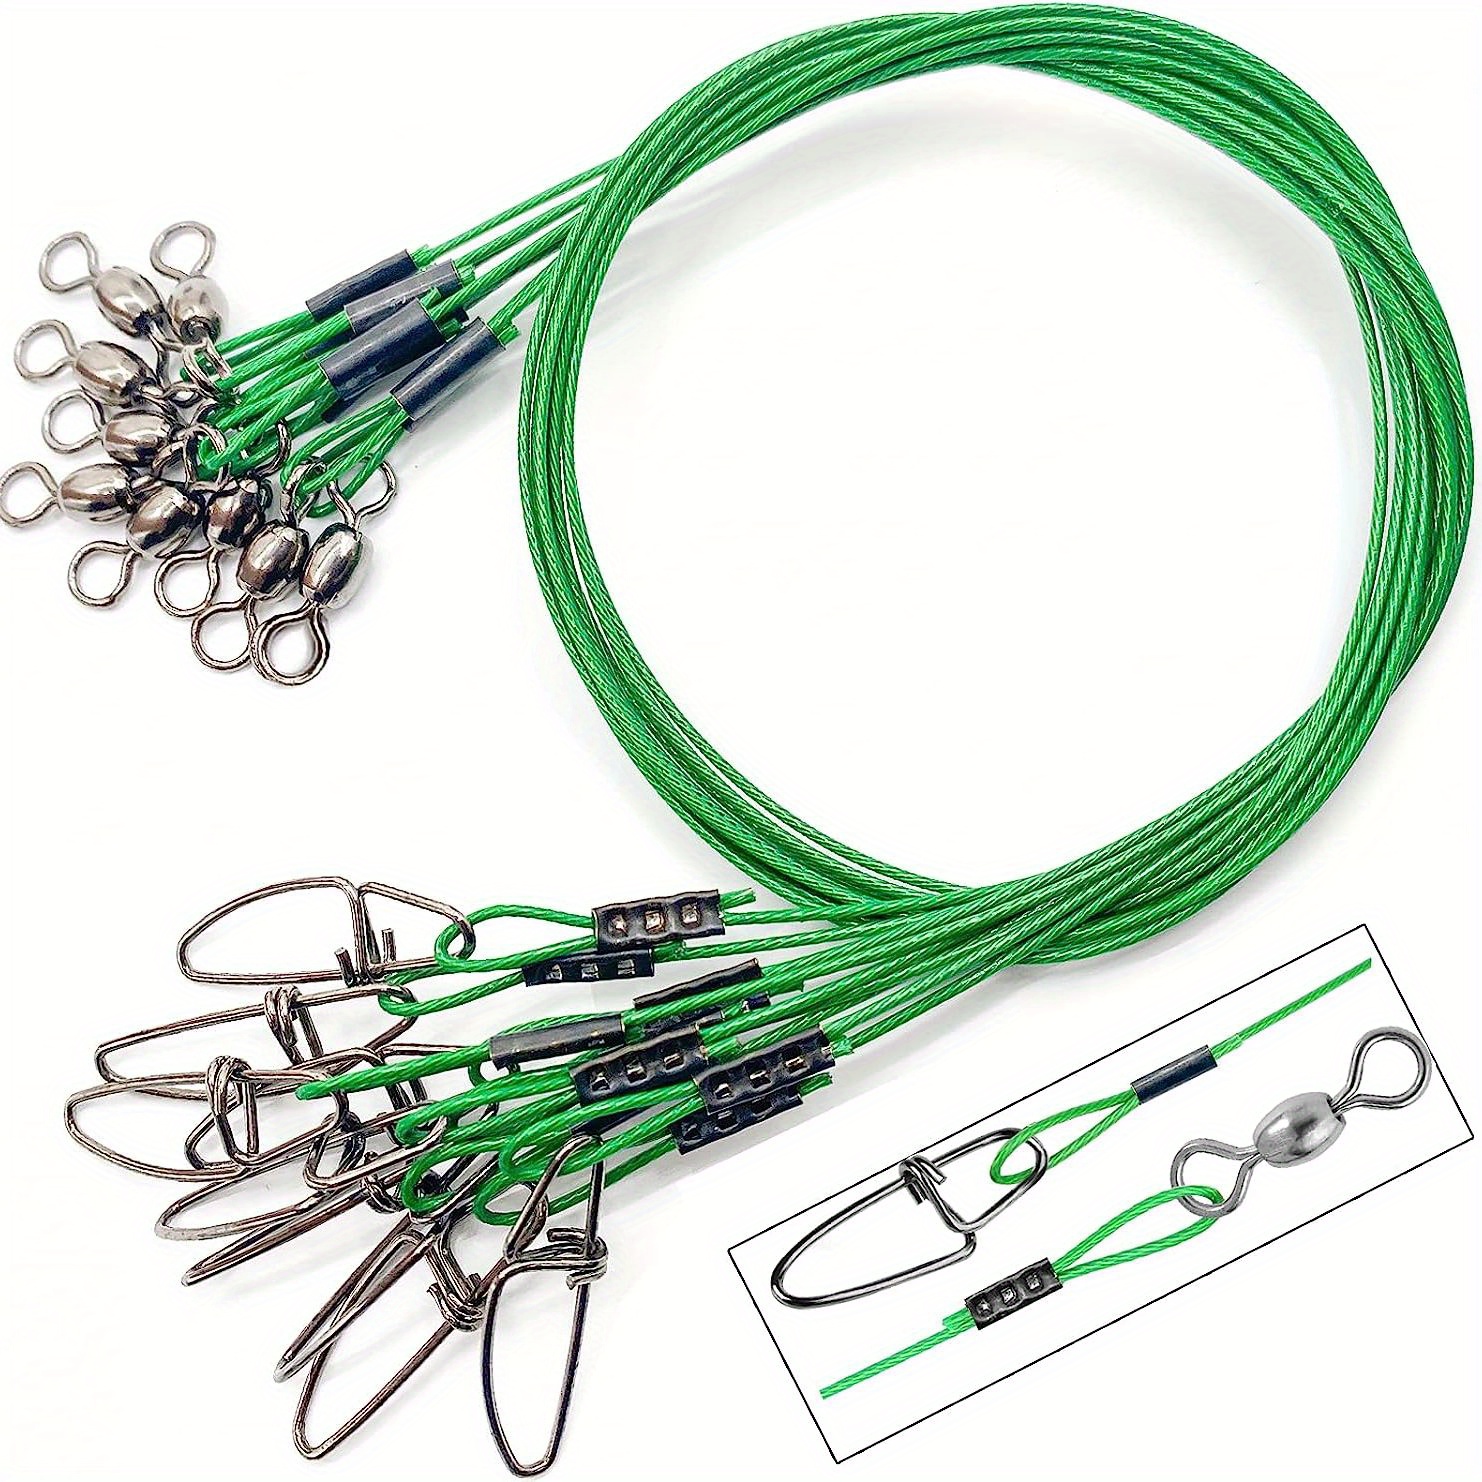  Fishing Leaders Stainless Steel Wire Rigs Saltwater